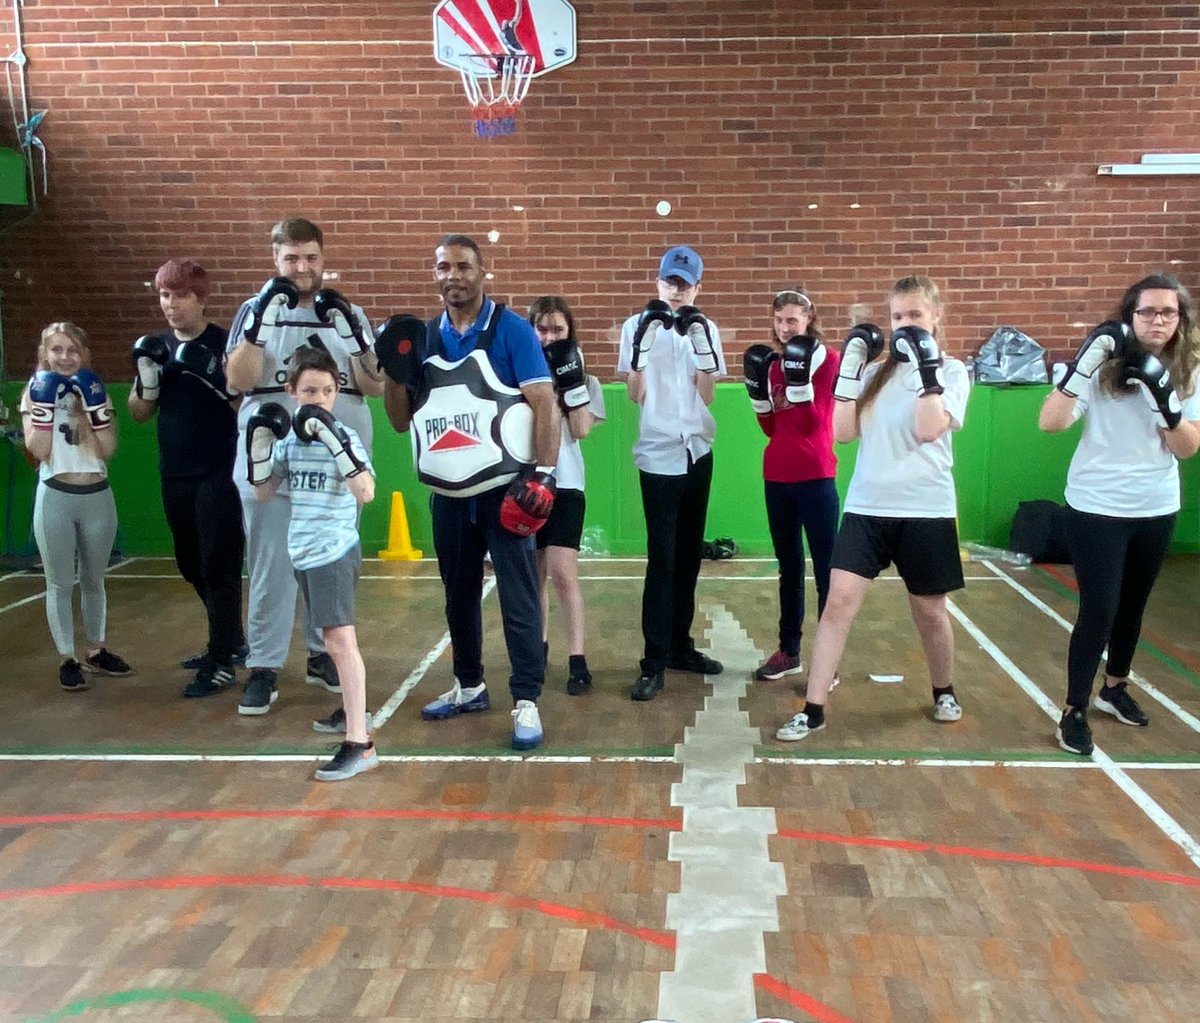 Box Clever on the road 🥊 Outstanding effort and work put in by all children involved today in sessions held in partnership with @LDCsportsdevel Get into It sports program every Thursday across both Burntwood and Lichfield Wayne here with the Liberty Jamboree group 🥊